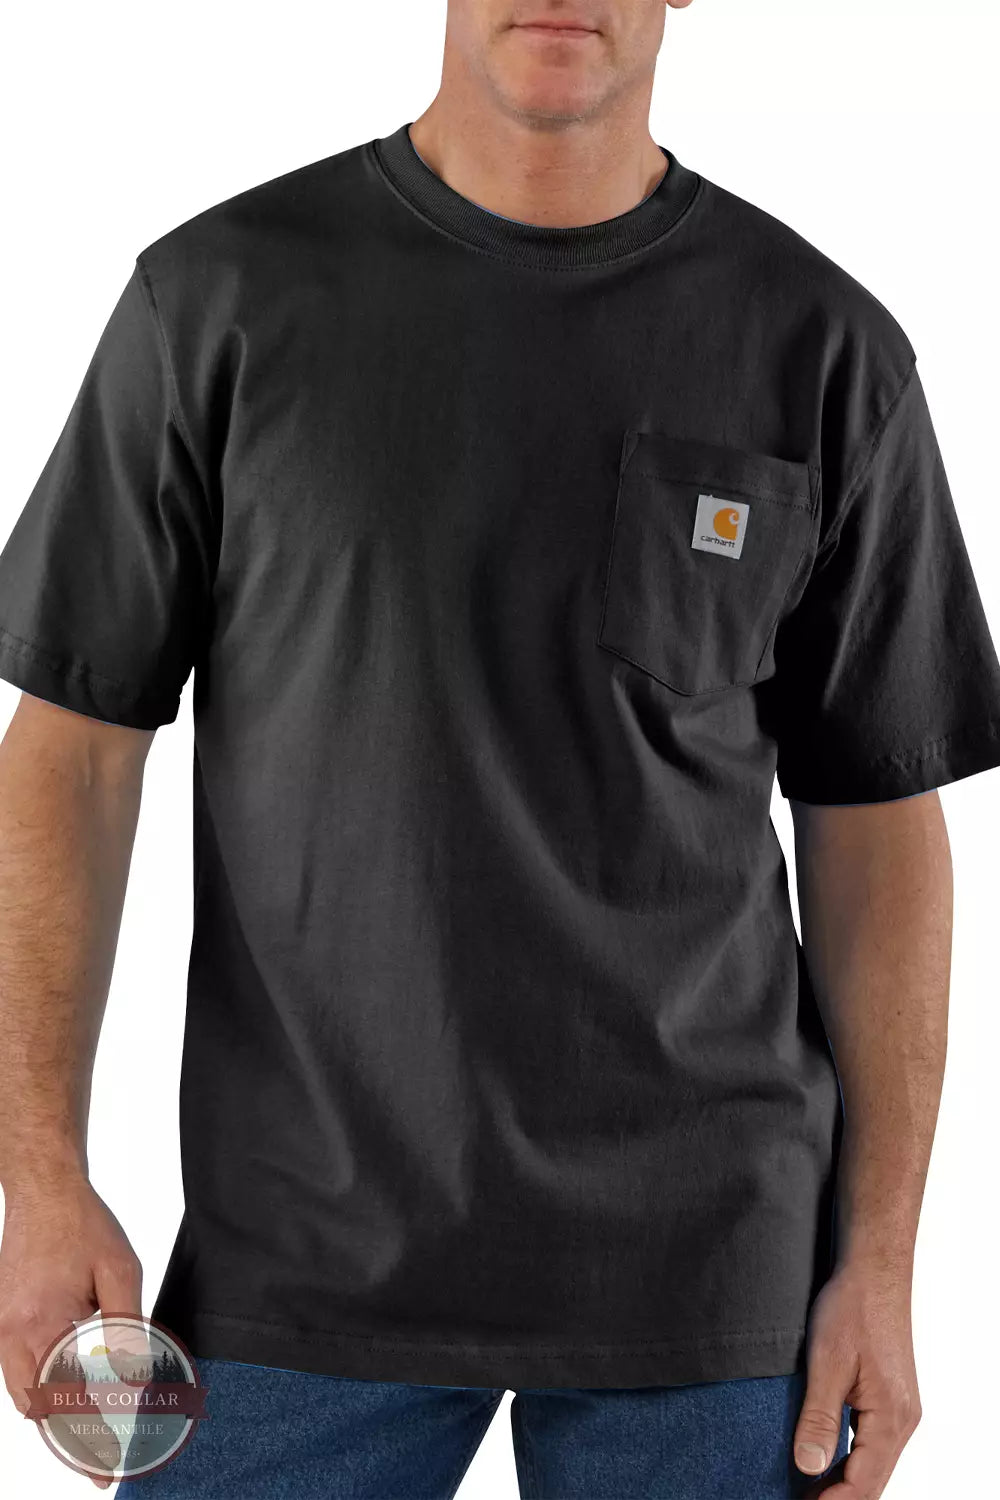 Carhartt K87 Loose Fit Heavyweight Short Sleeve Pocket T-Shirt Big and Tall Basic Colors Black Front View